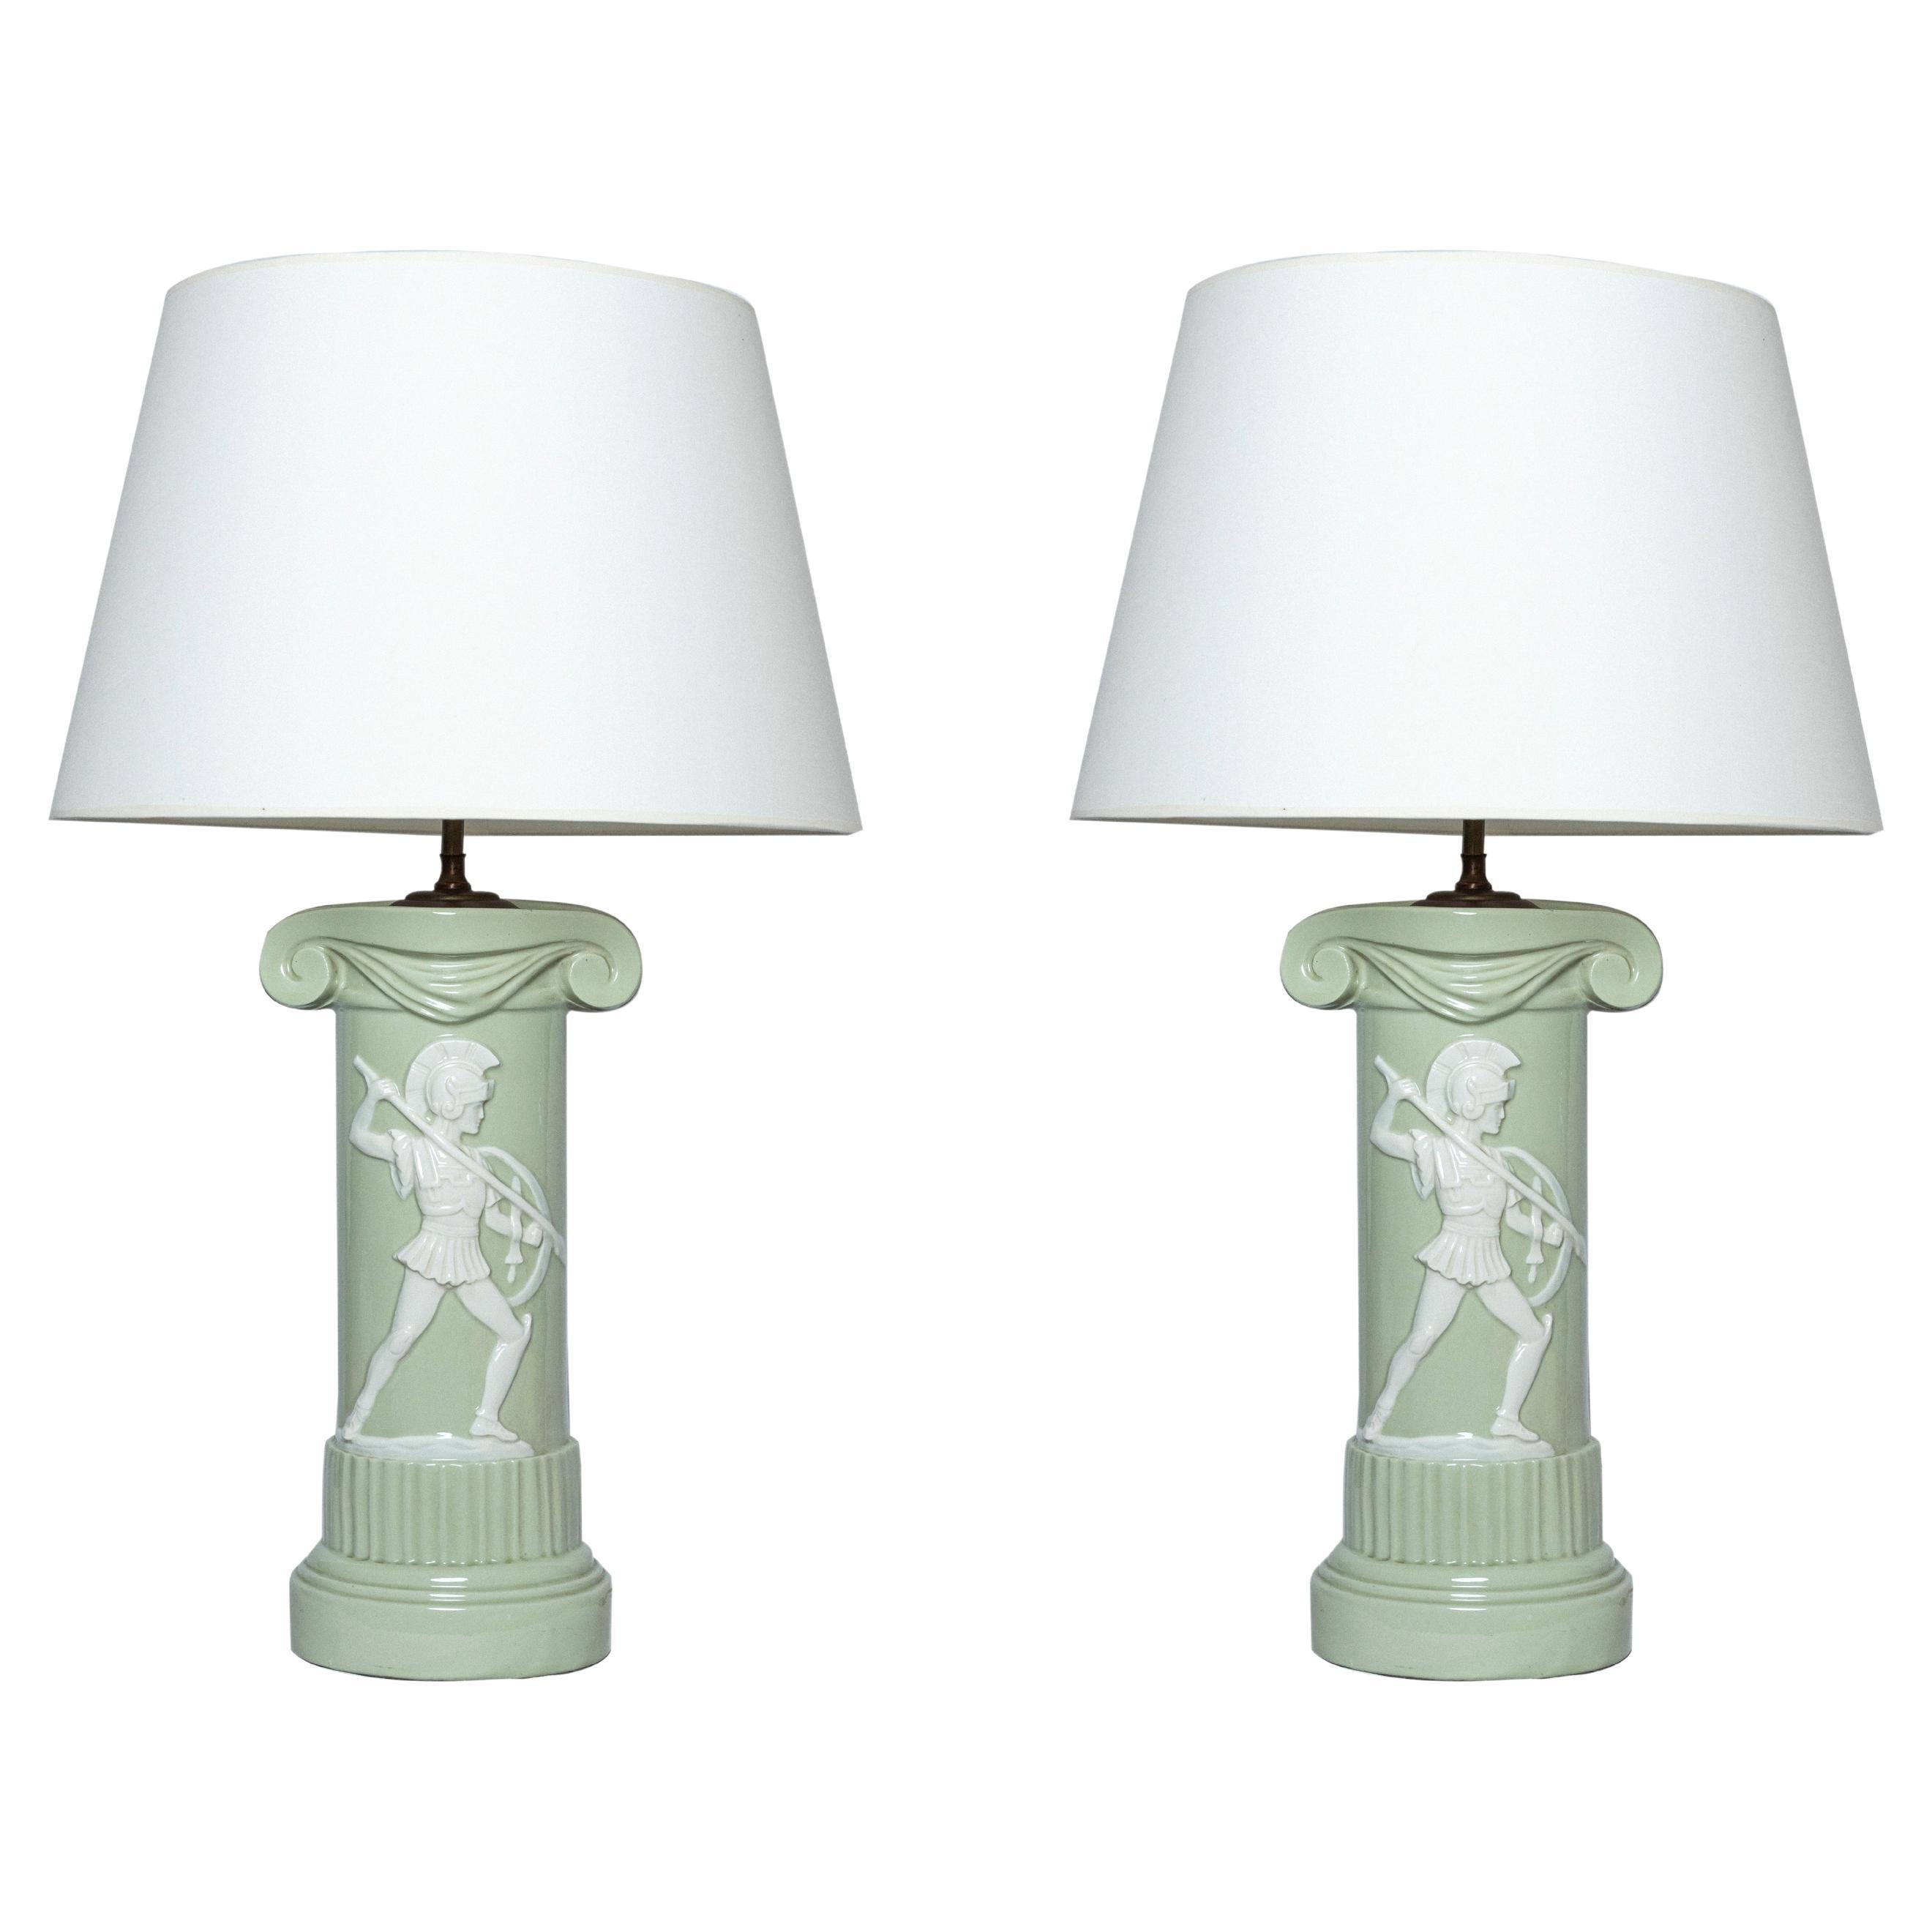 20th century pair of green and white porcelain ionic column table lamps For Sale